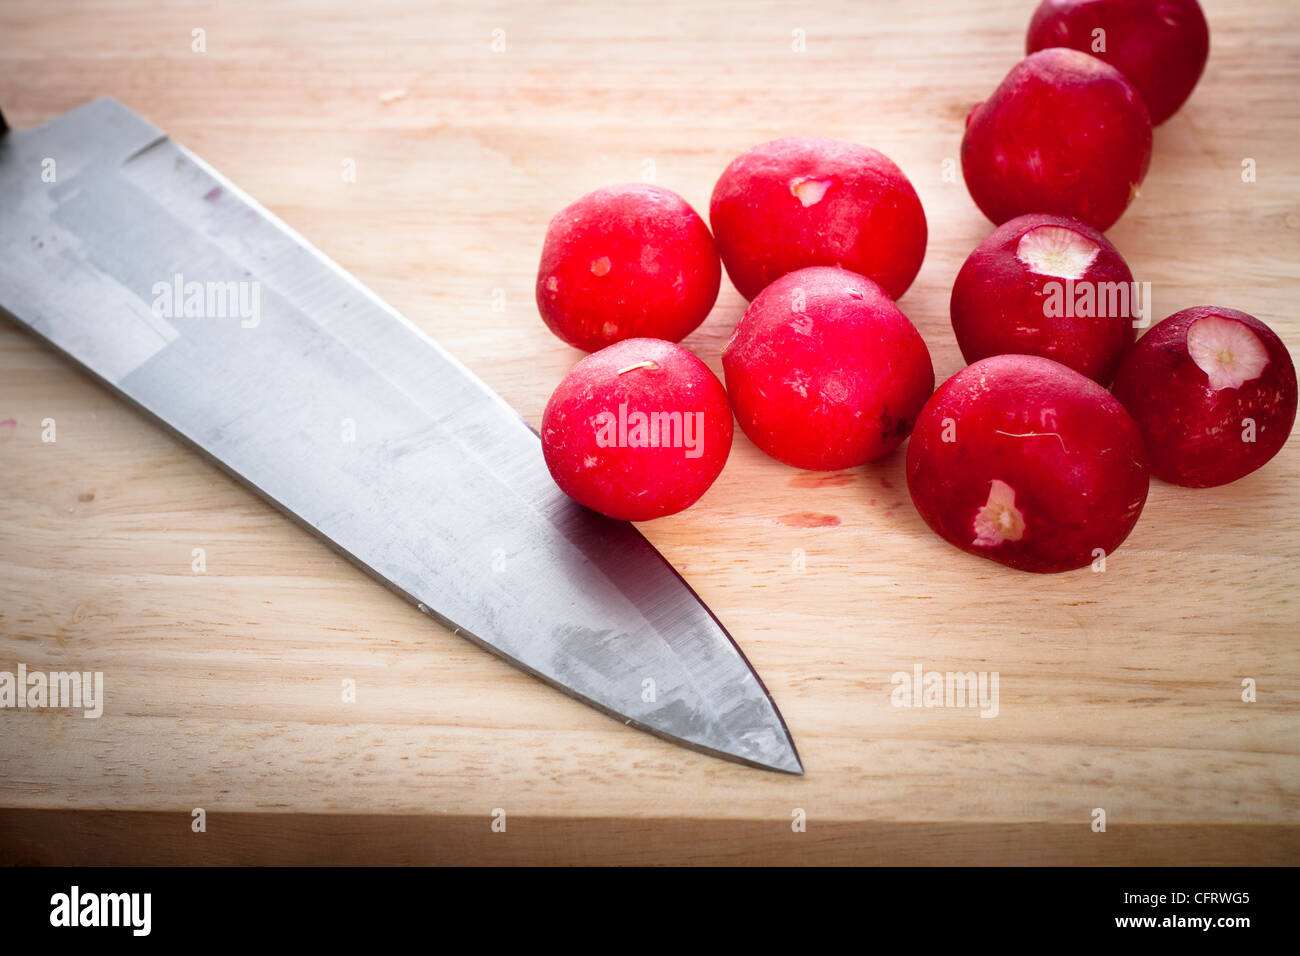 https://c8.alamy.com/comp/CFRWG5/detail-of-chopping-board-with-knife-and-fresh-radishes-CFRWG5.jpg